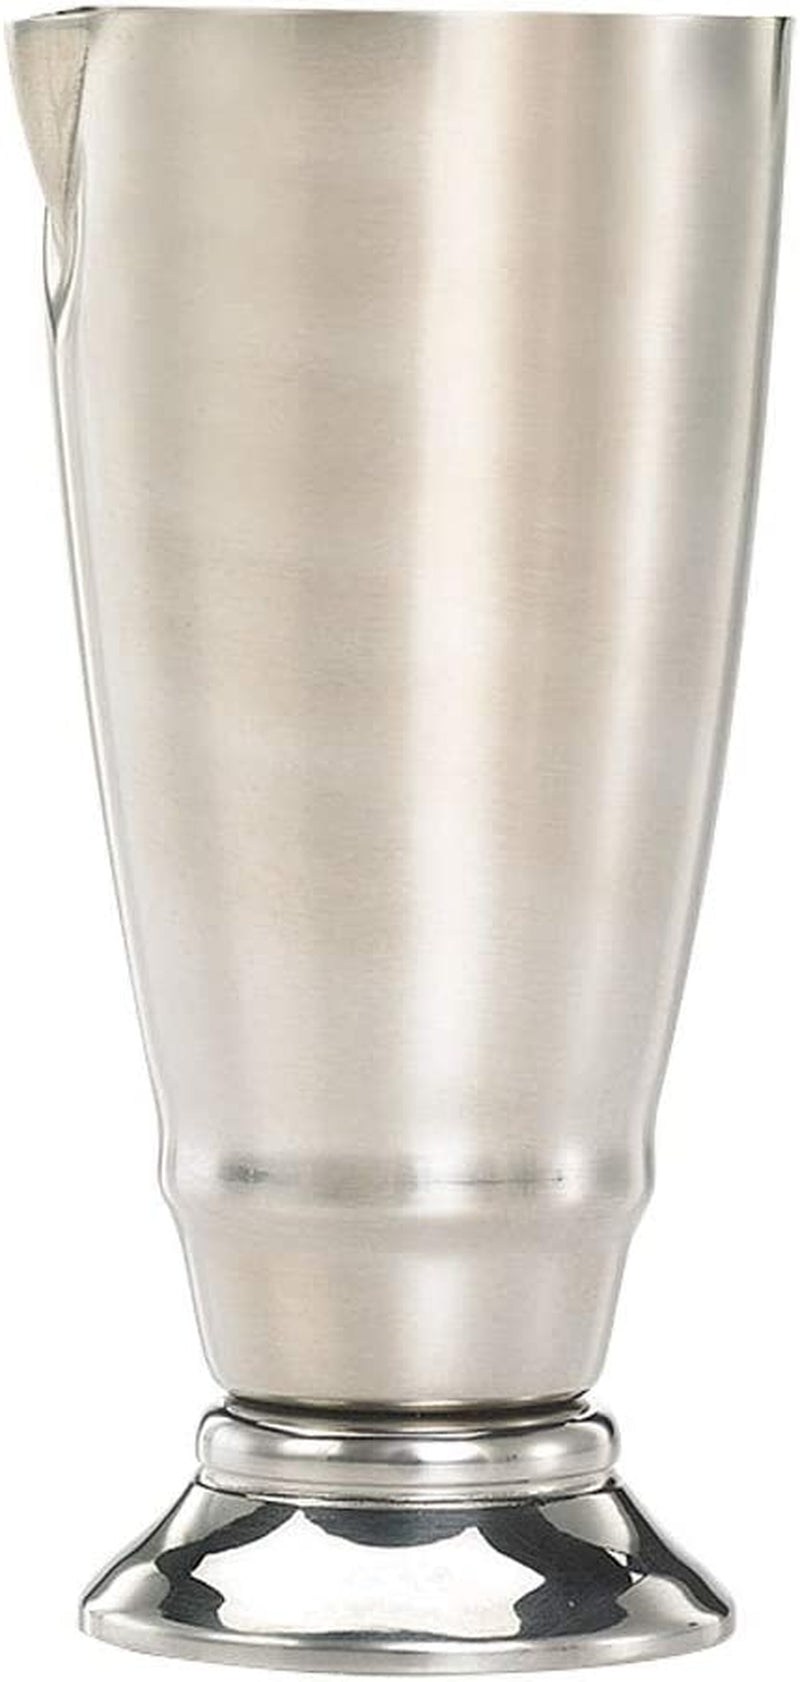 Barfly M37108 Drink Jigger, 2 oz, Stainless w/Handle